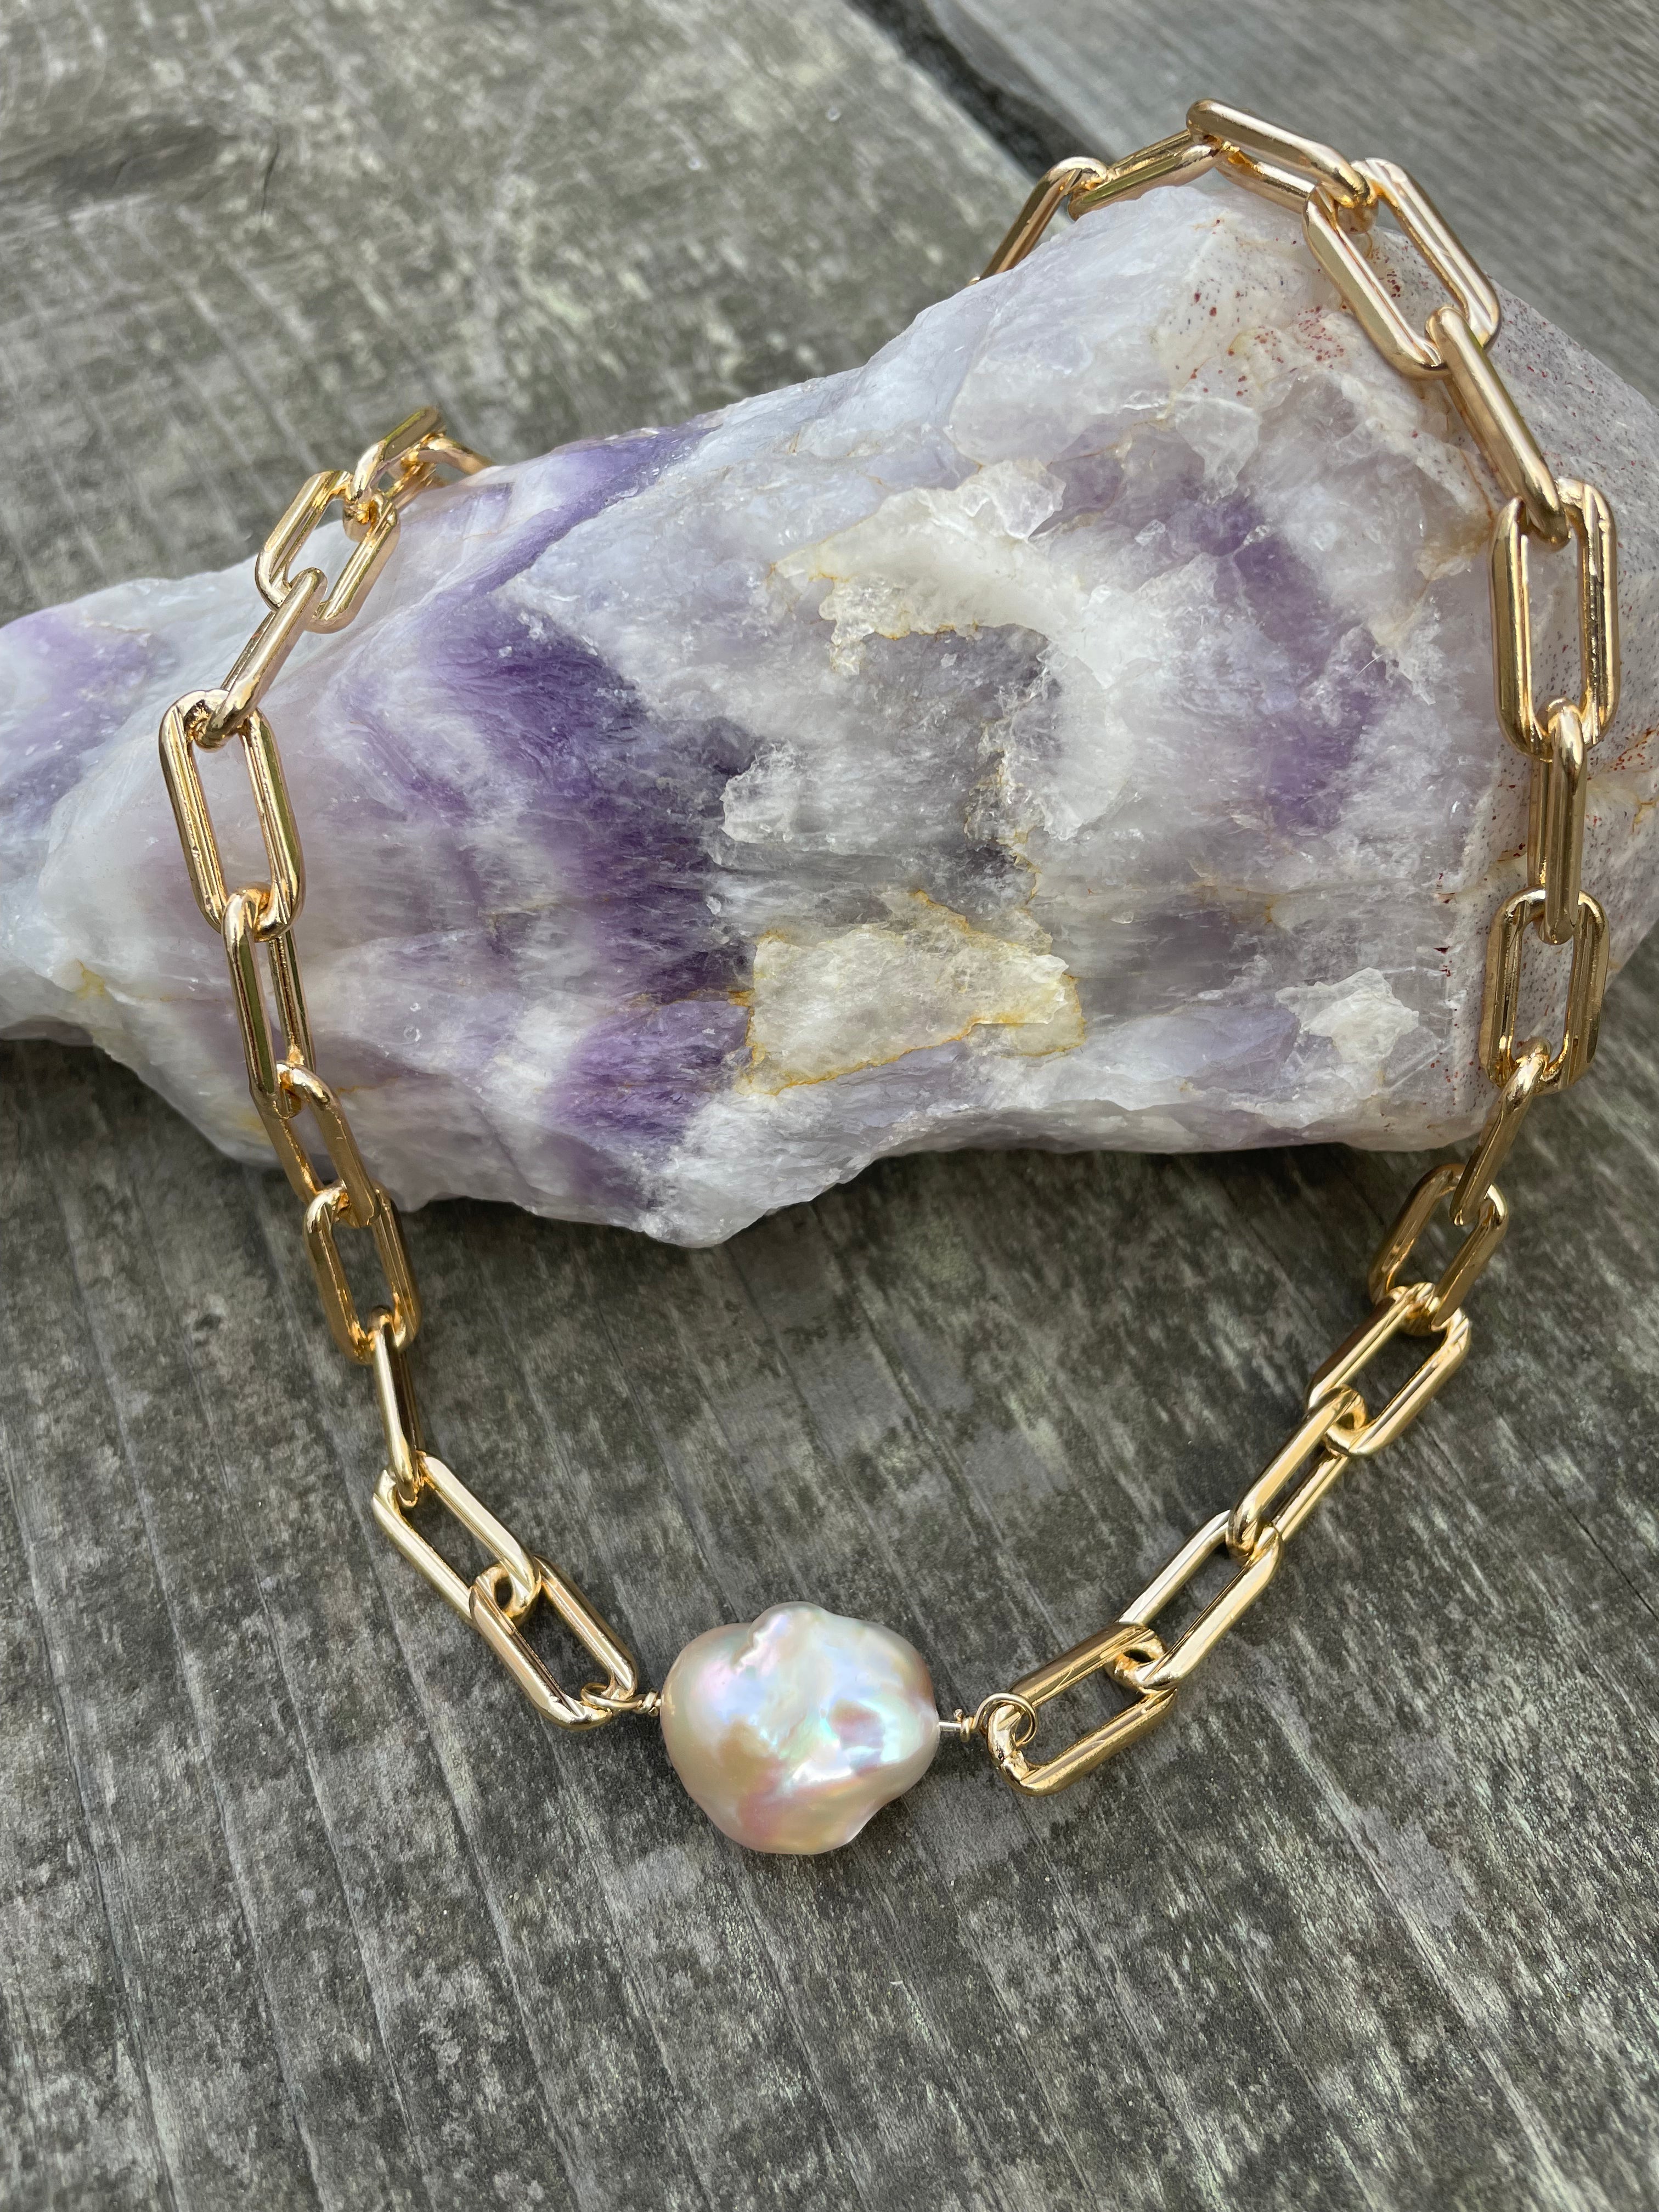 Extra large gold linked chain with a large pink fireball shaped pearl laying on a purple crystal on a wooden background